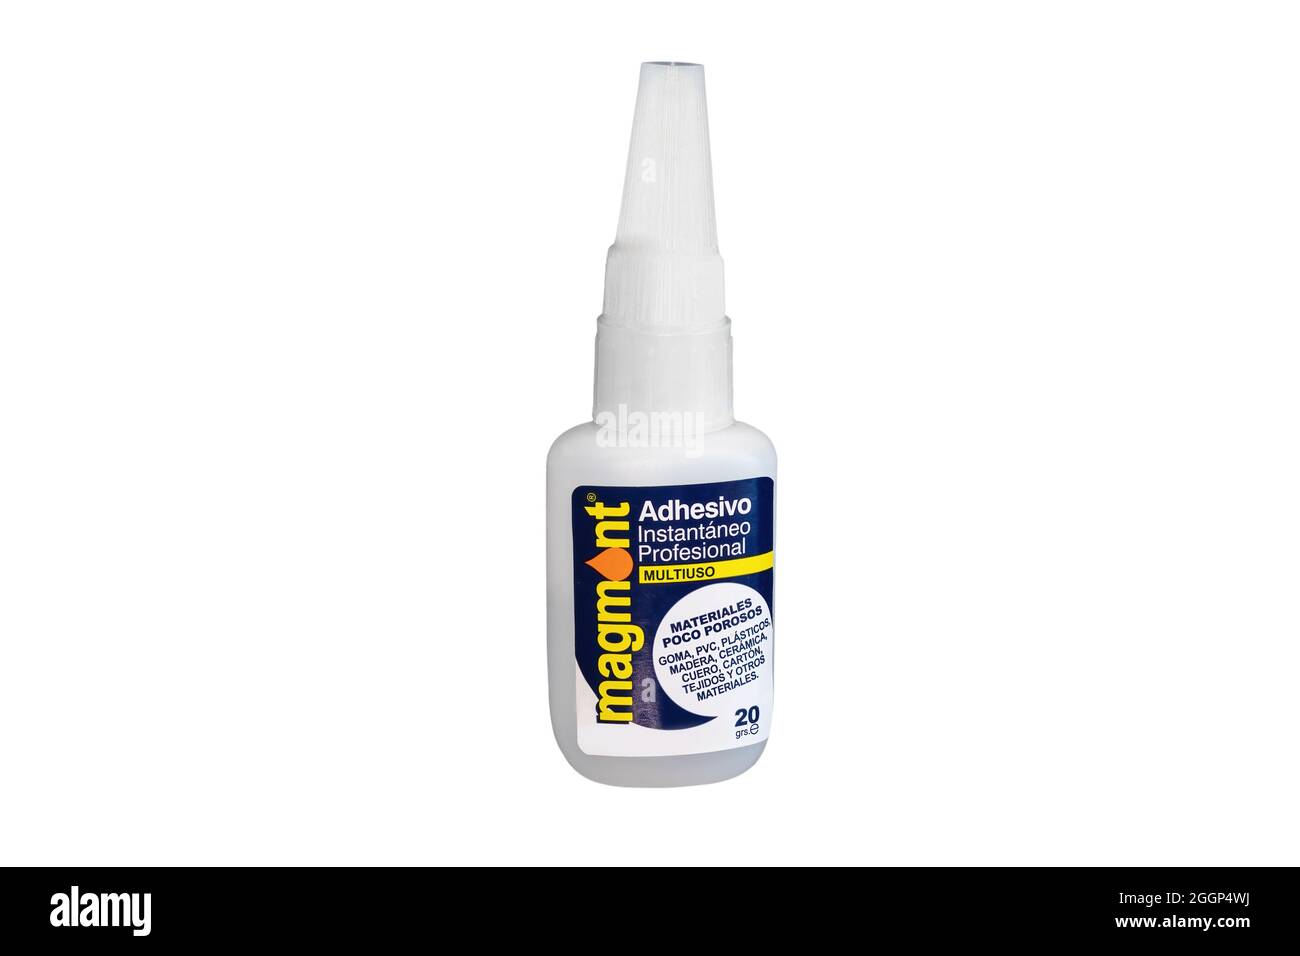 Huelva, Spain - August 28, 2021: Bottle of cyanoacrylate adhesive of a generic spanish brand. Cyanoacrylates are a family of strong fast-acting adhesi Stock Photo